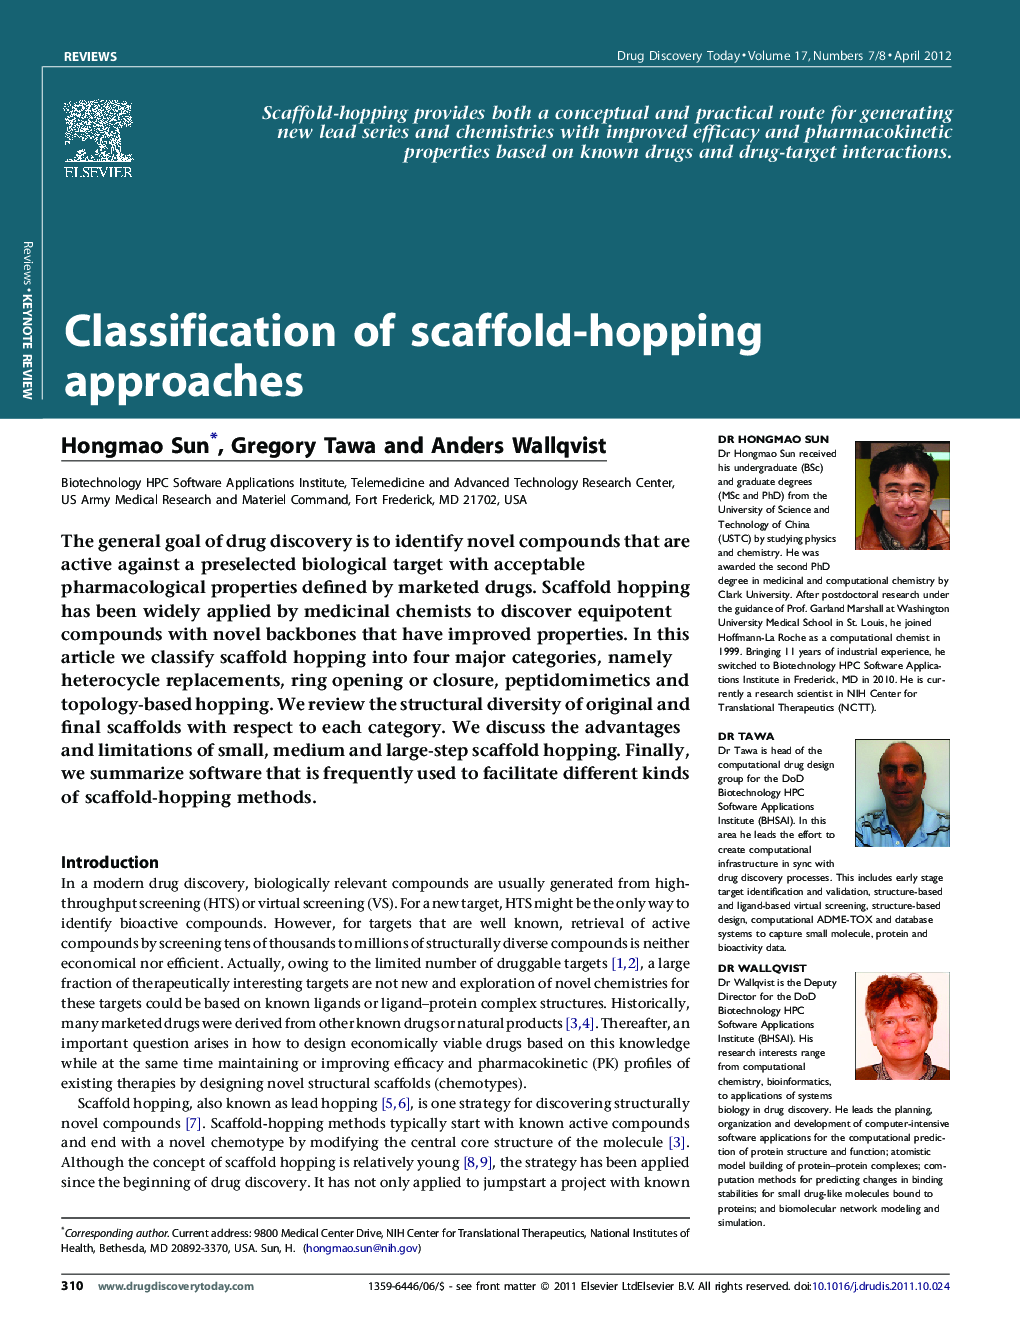 Classification of scaffold-hopping approaches